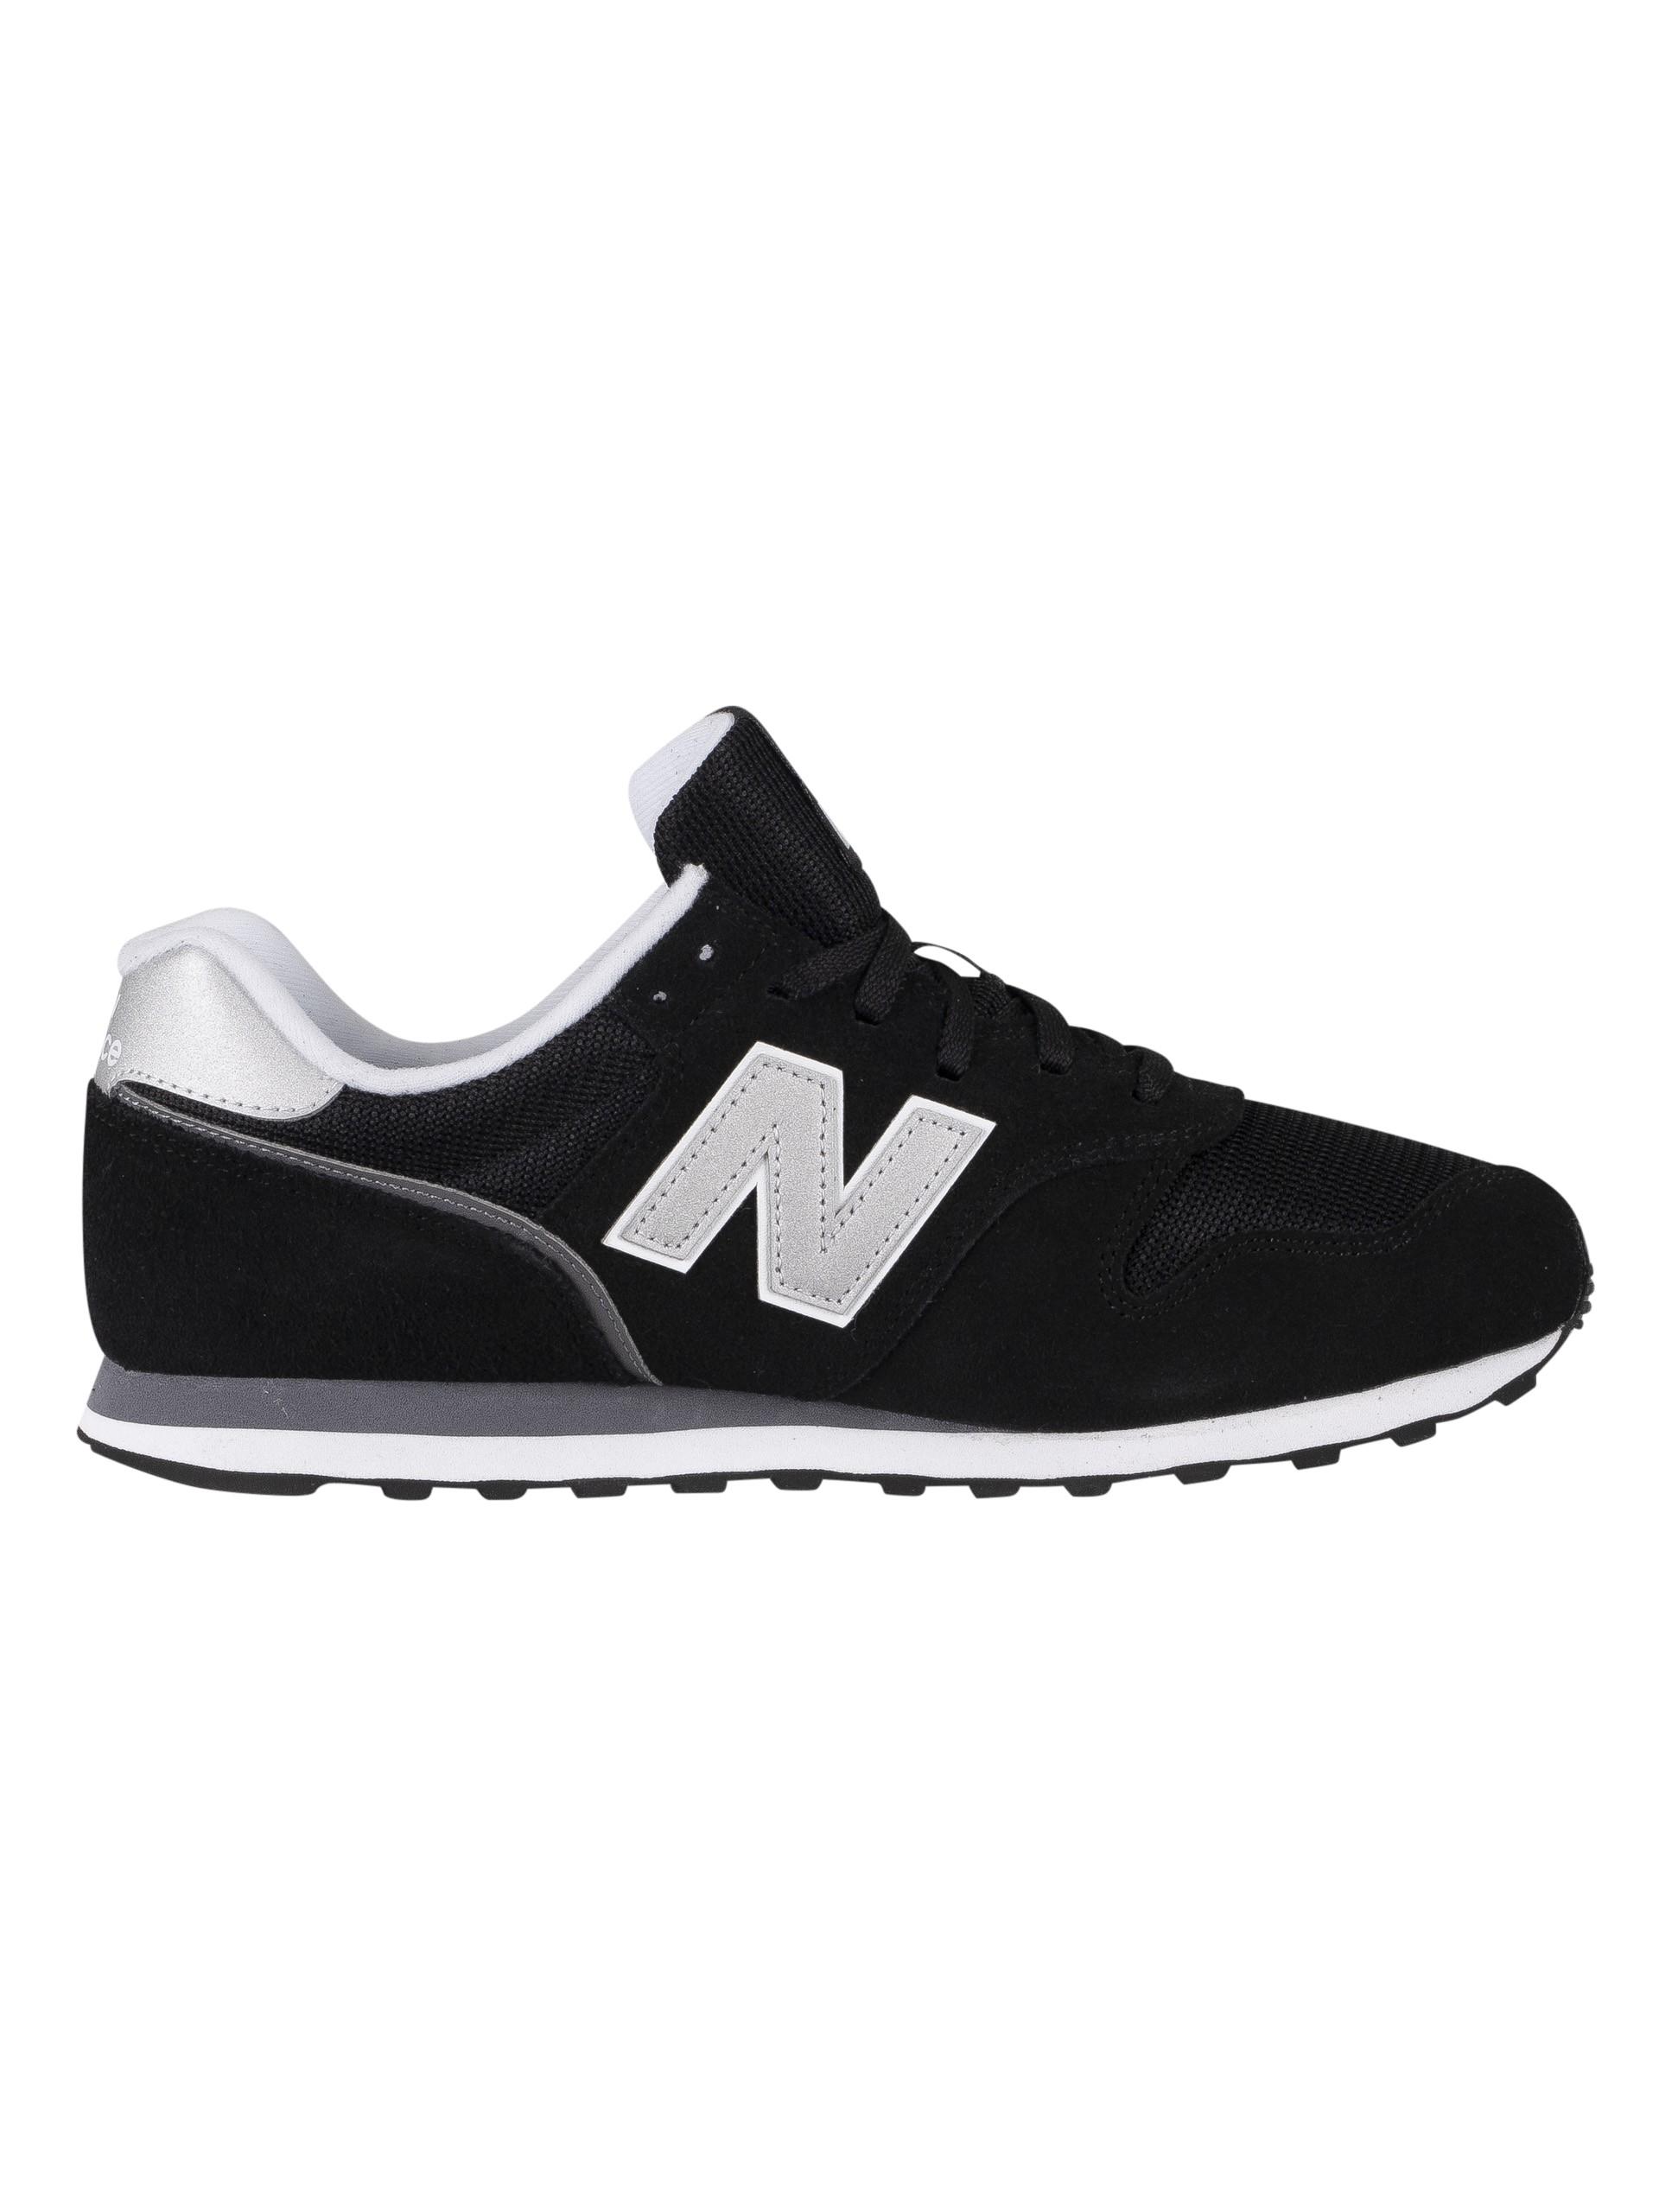 New Balance Leather 373 V2 Classic in Black/Silver (Black) for Men ...